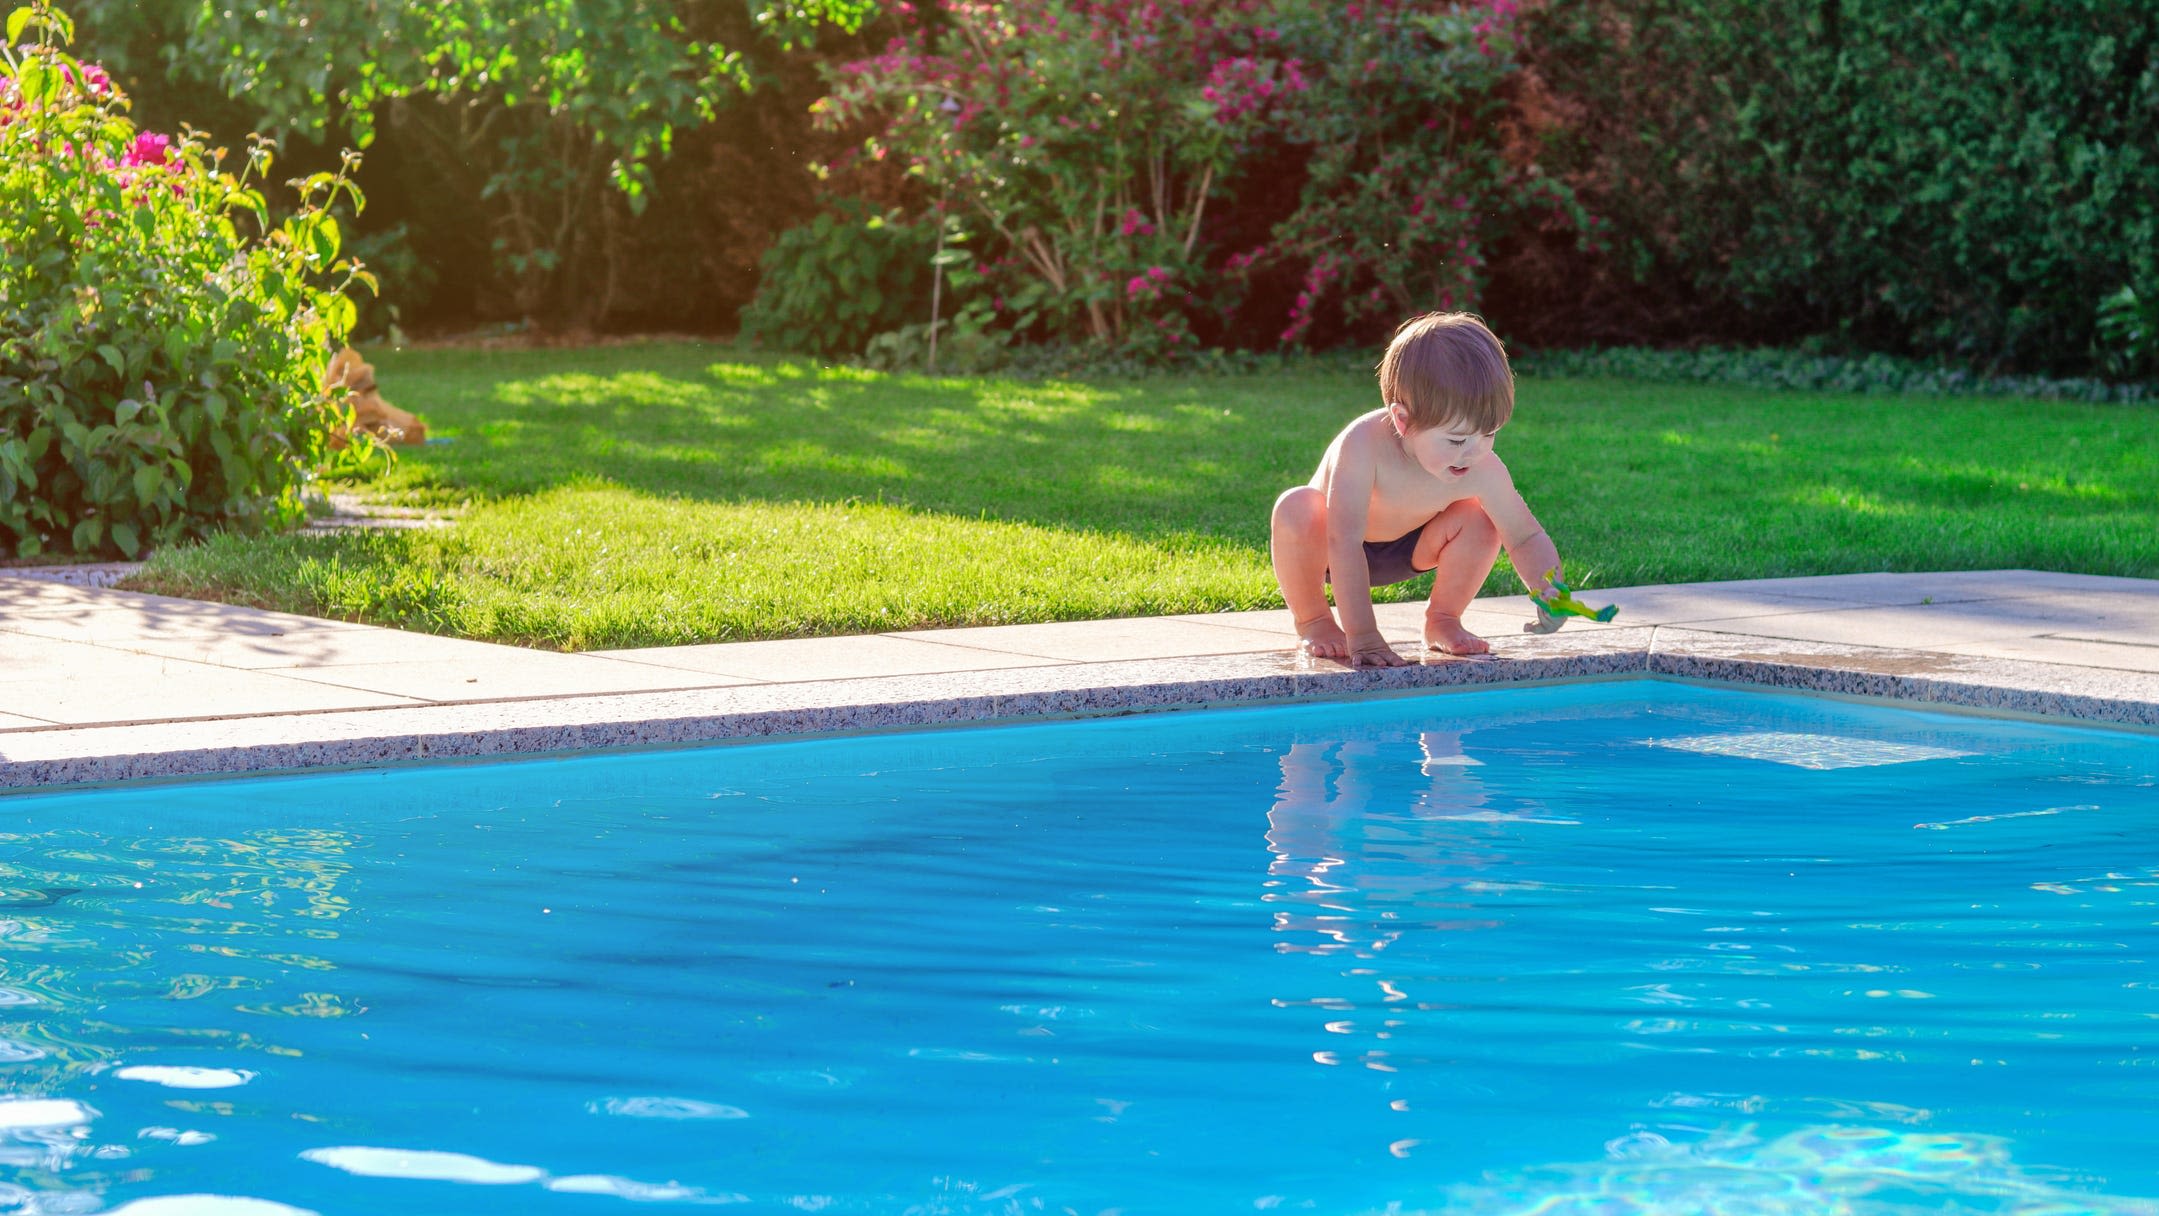 Drowning is a top cause of death for young children. Here's what parents should know.